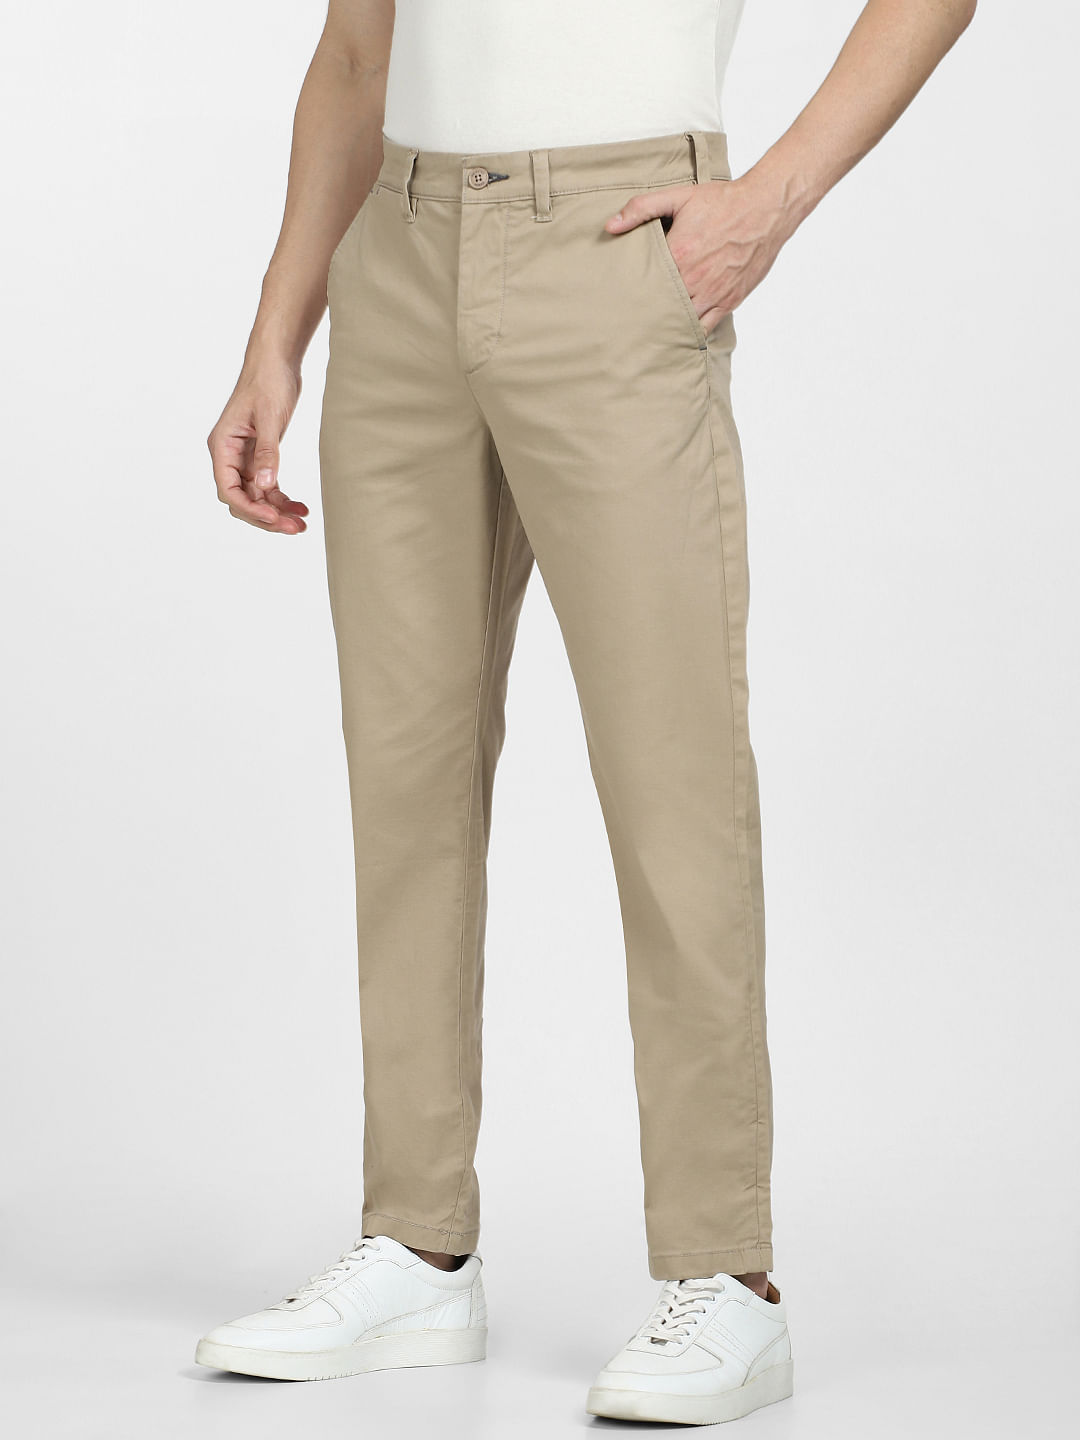 Men Mens Cotton Slim Fit Solid Cargos Casual Trousers with Cargo Pockets Mens Plain Cargo